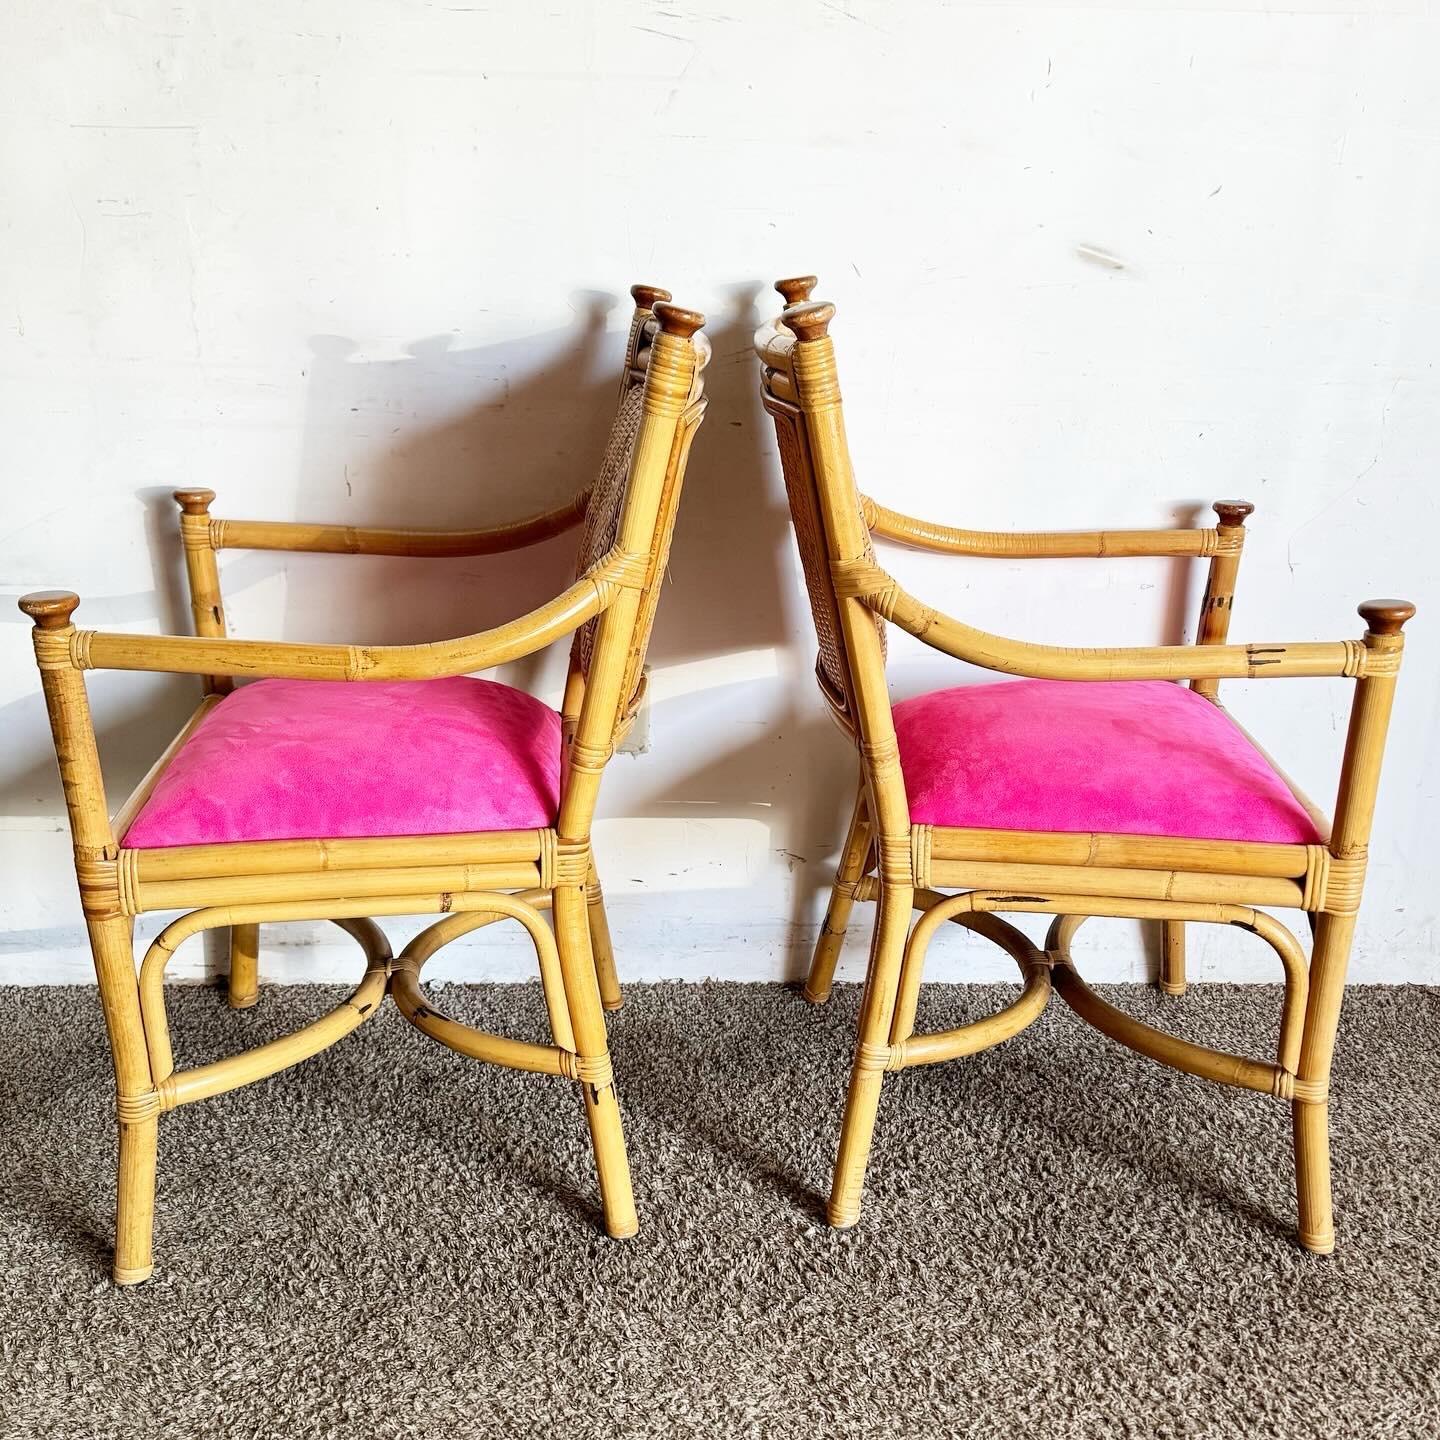 Boho Chic Wicker Rattan Bamboo Dining Arm Chairs With Hot Pink Cushions In Good Condition For Sale In Delray Beach, FL